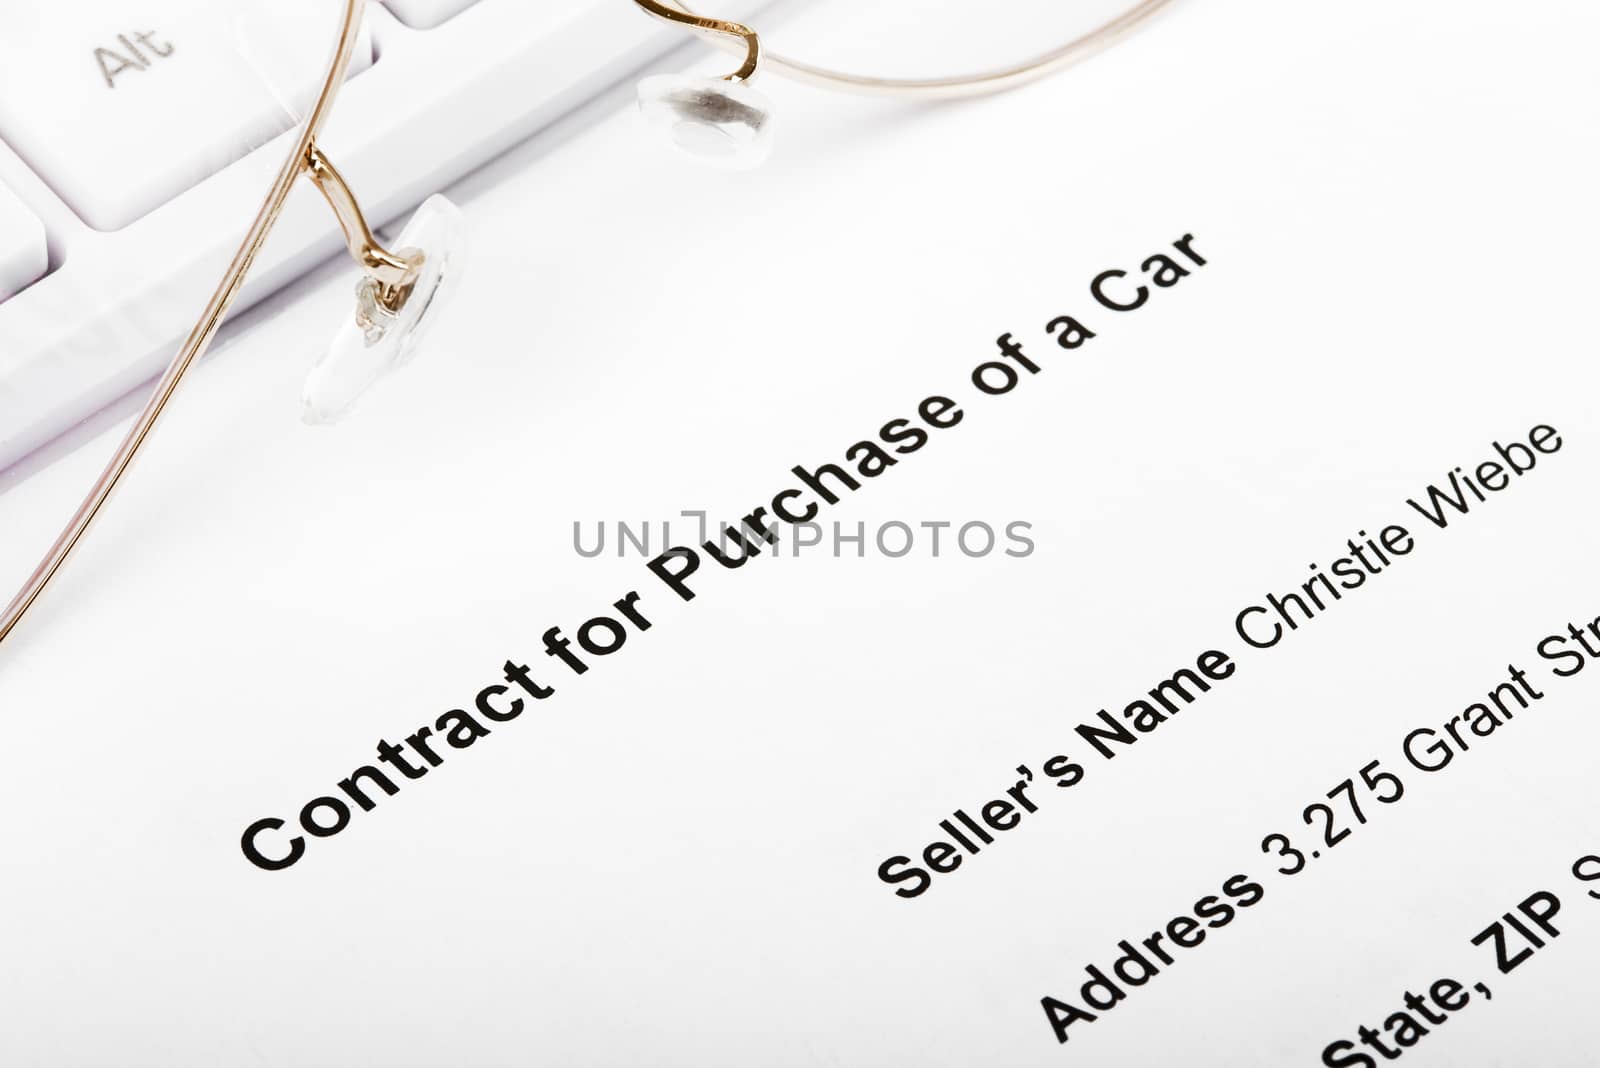 Keyboard with eyeglasses and contract for purchase of car